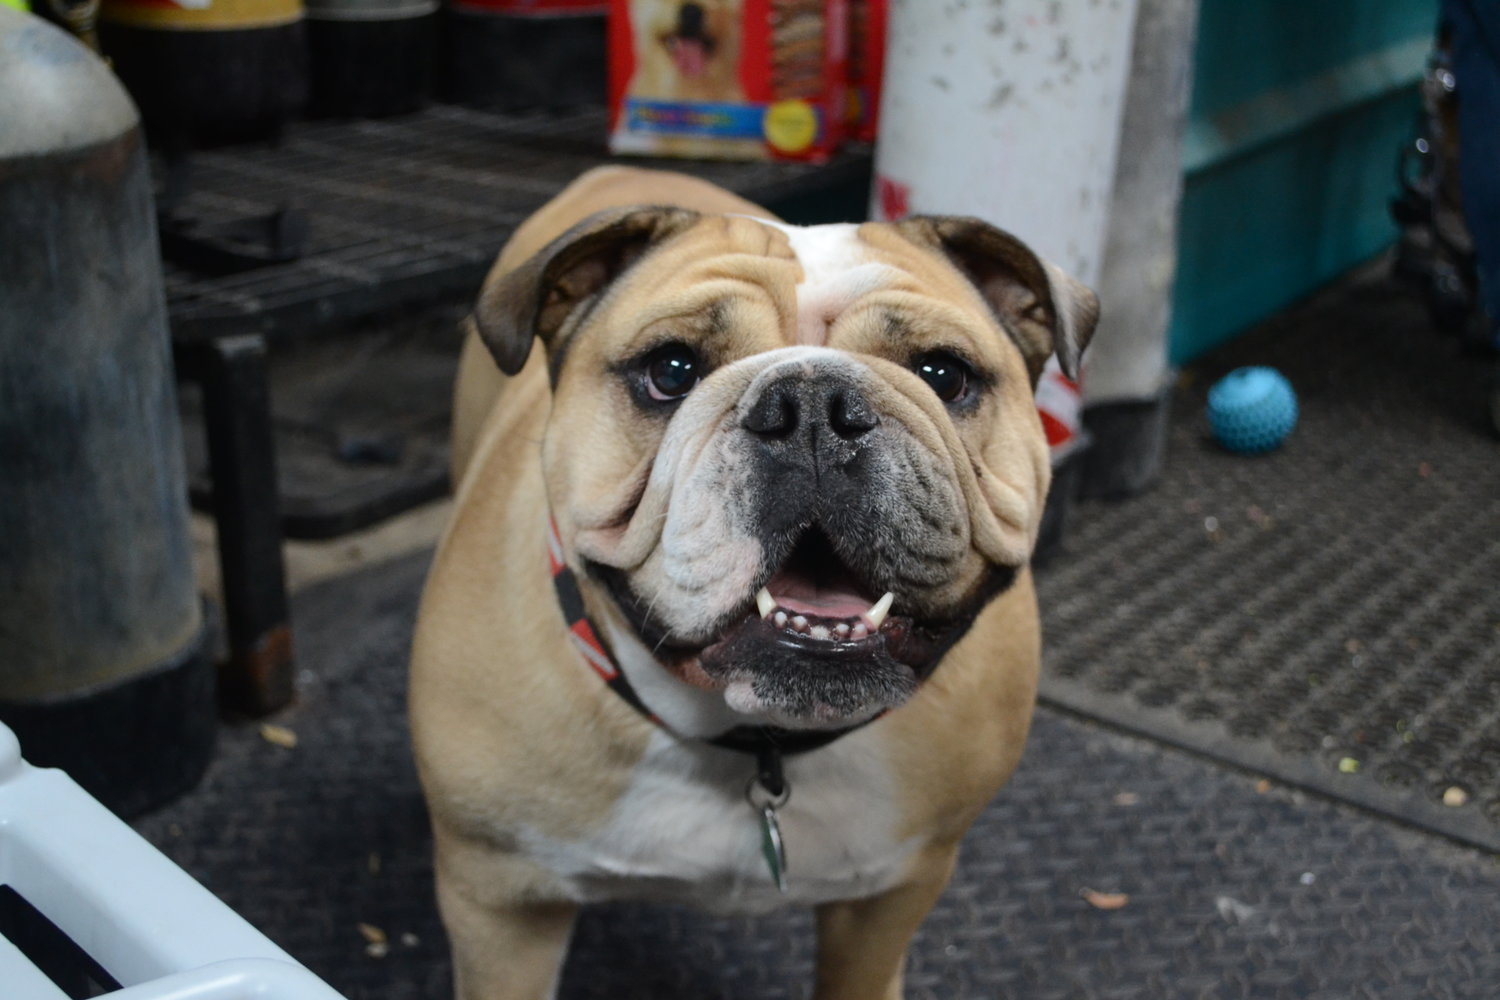 Kenzie, a friendly English Bulldog with an affinity for treats, welcomes all patrons of the dive shop.